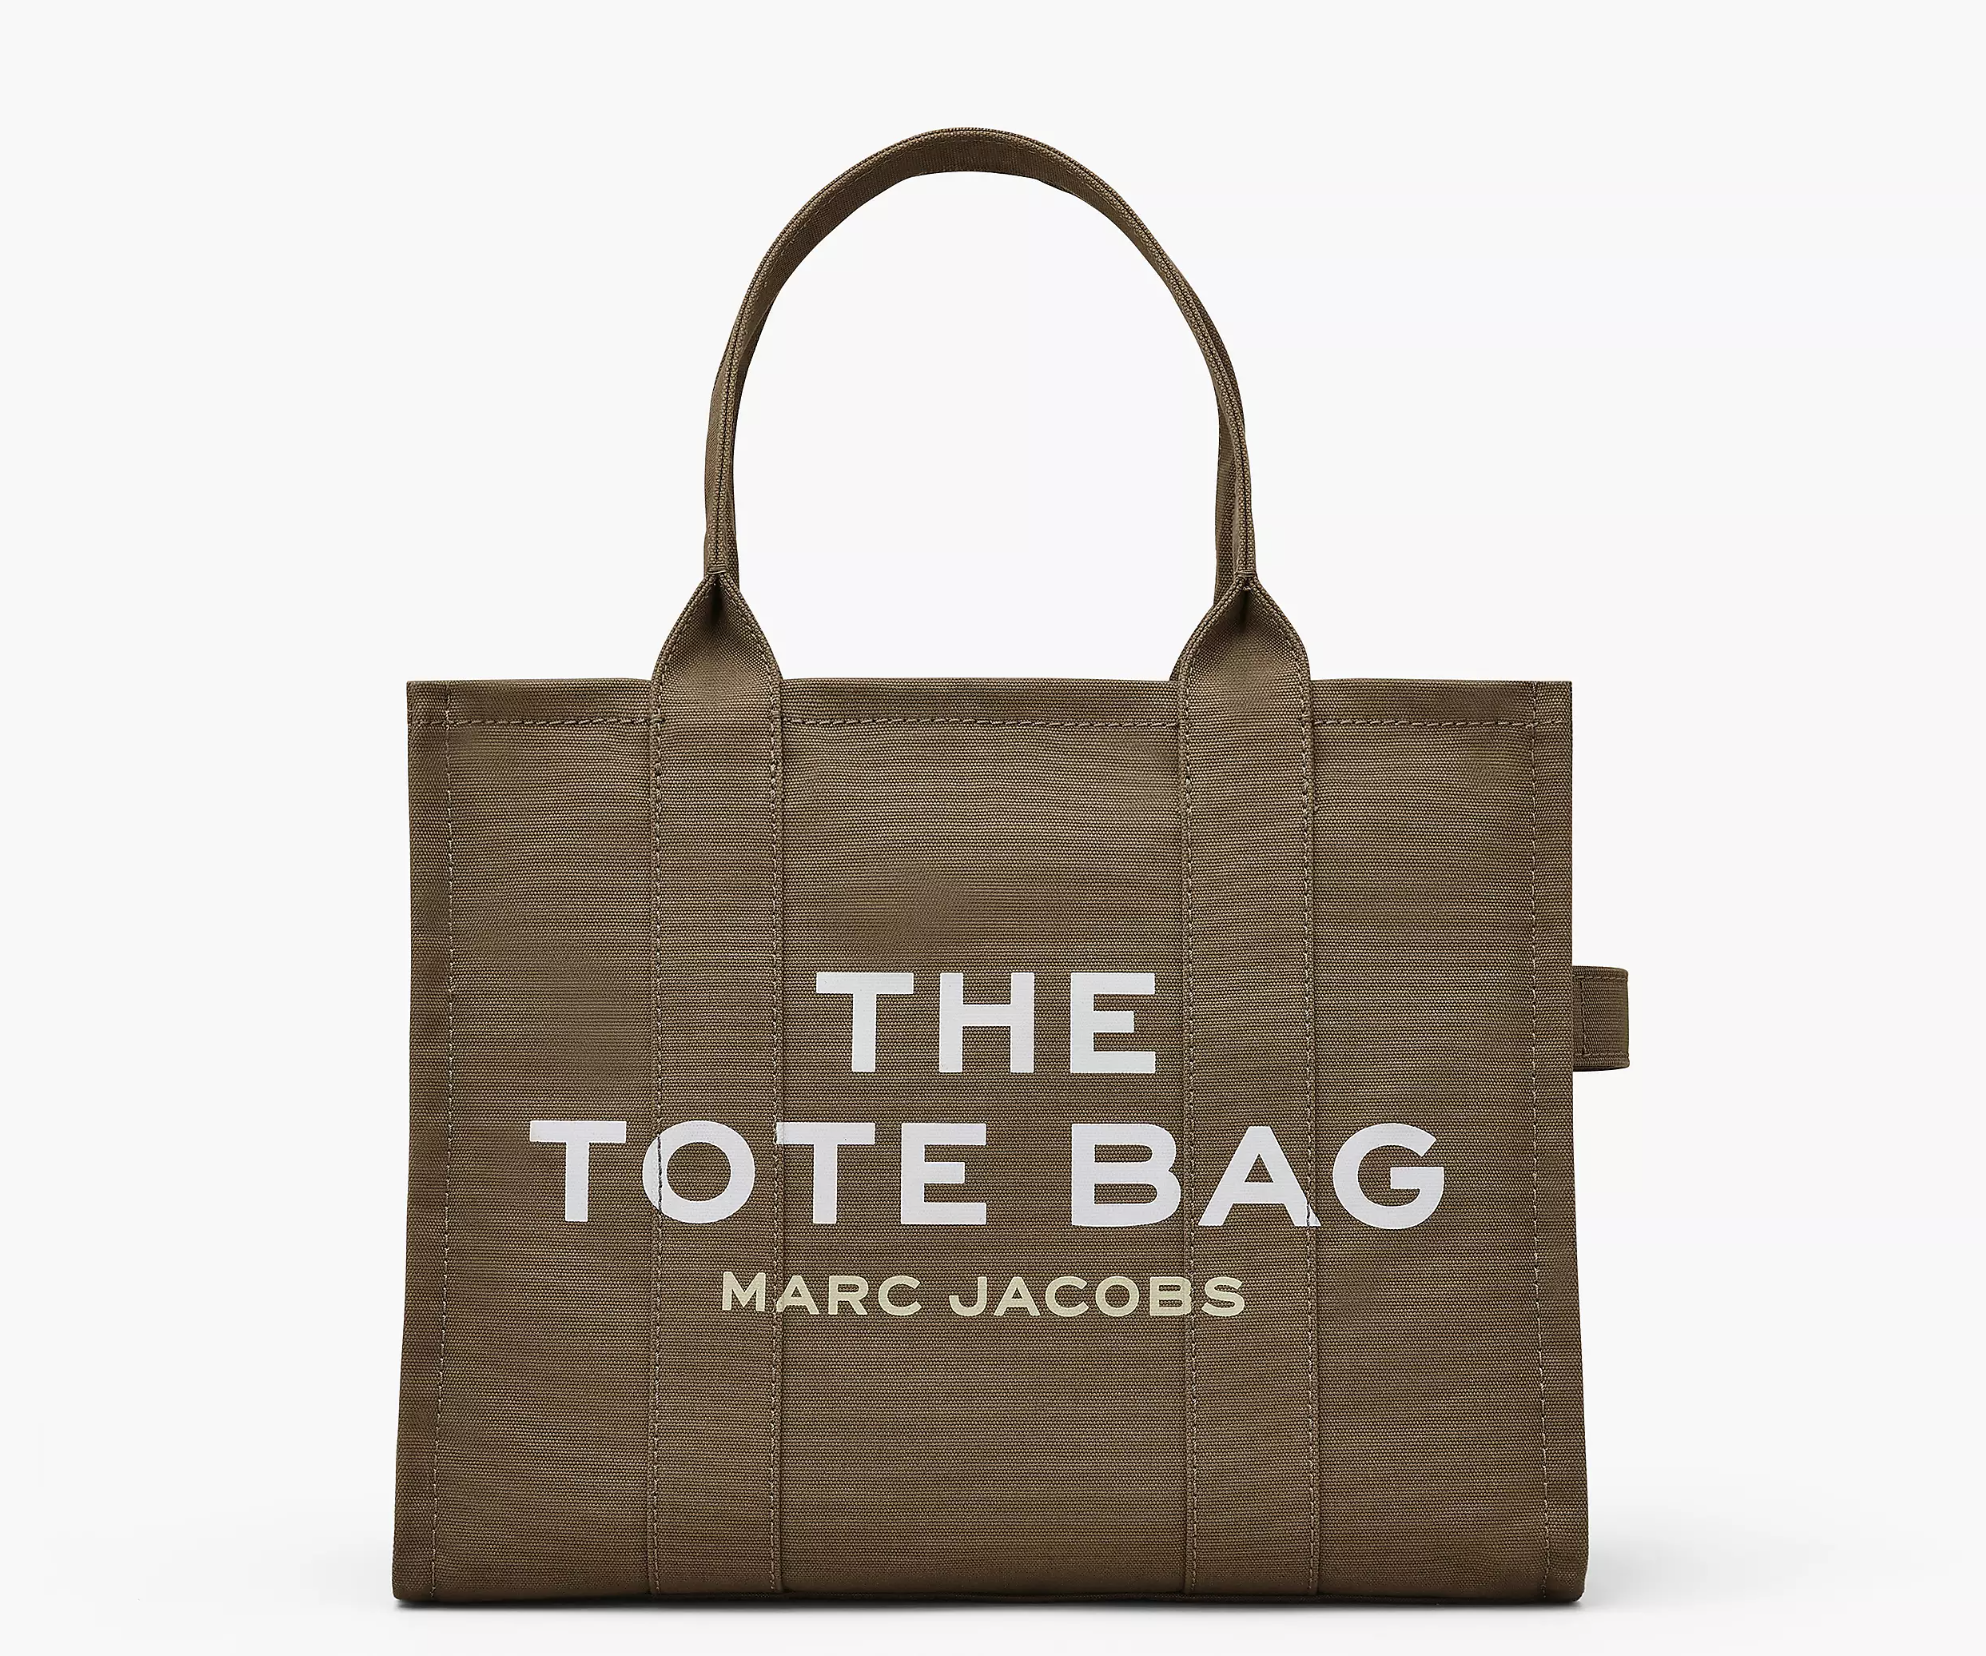 The Large Tote Canvas